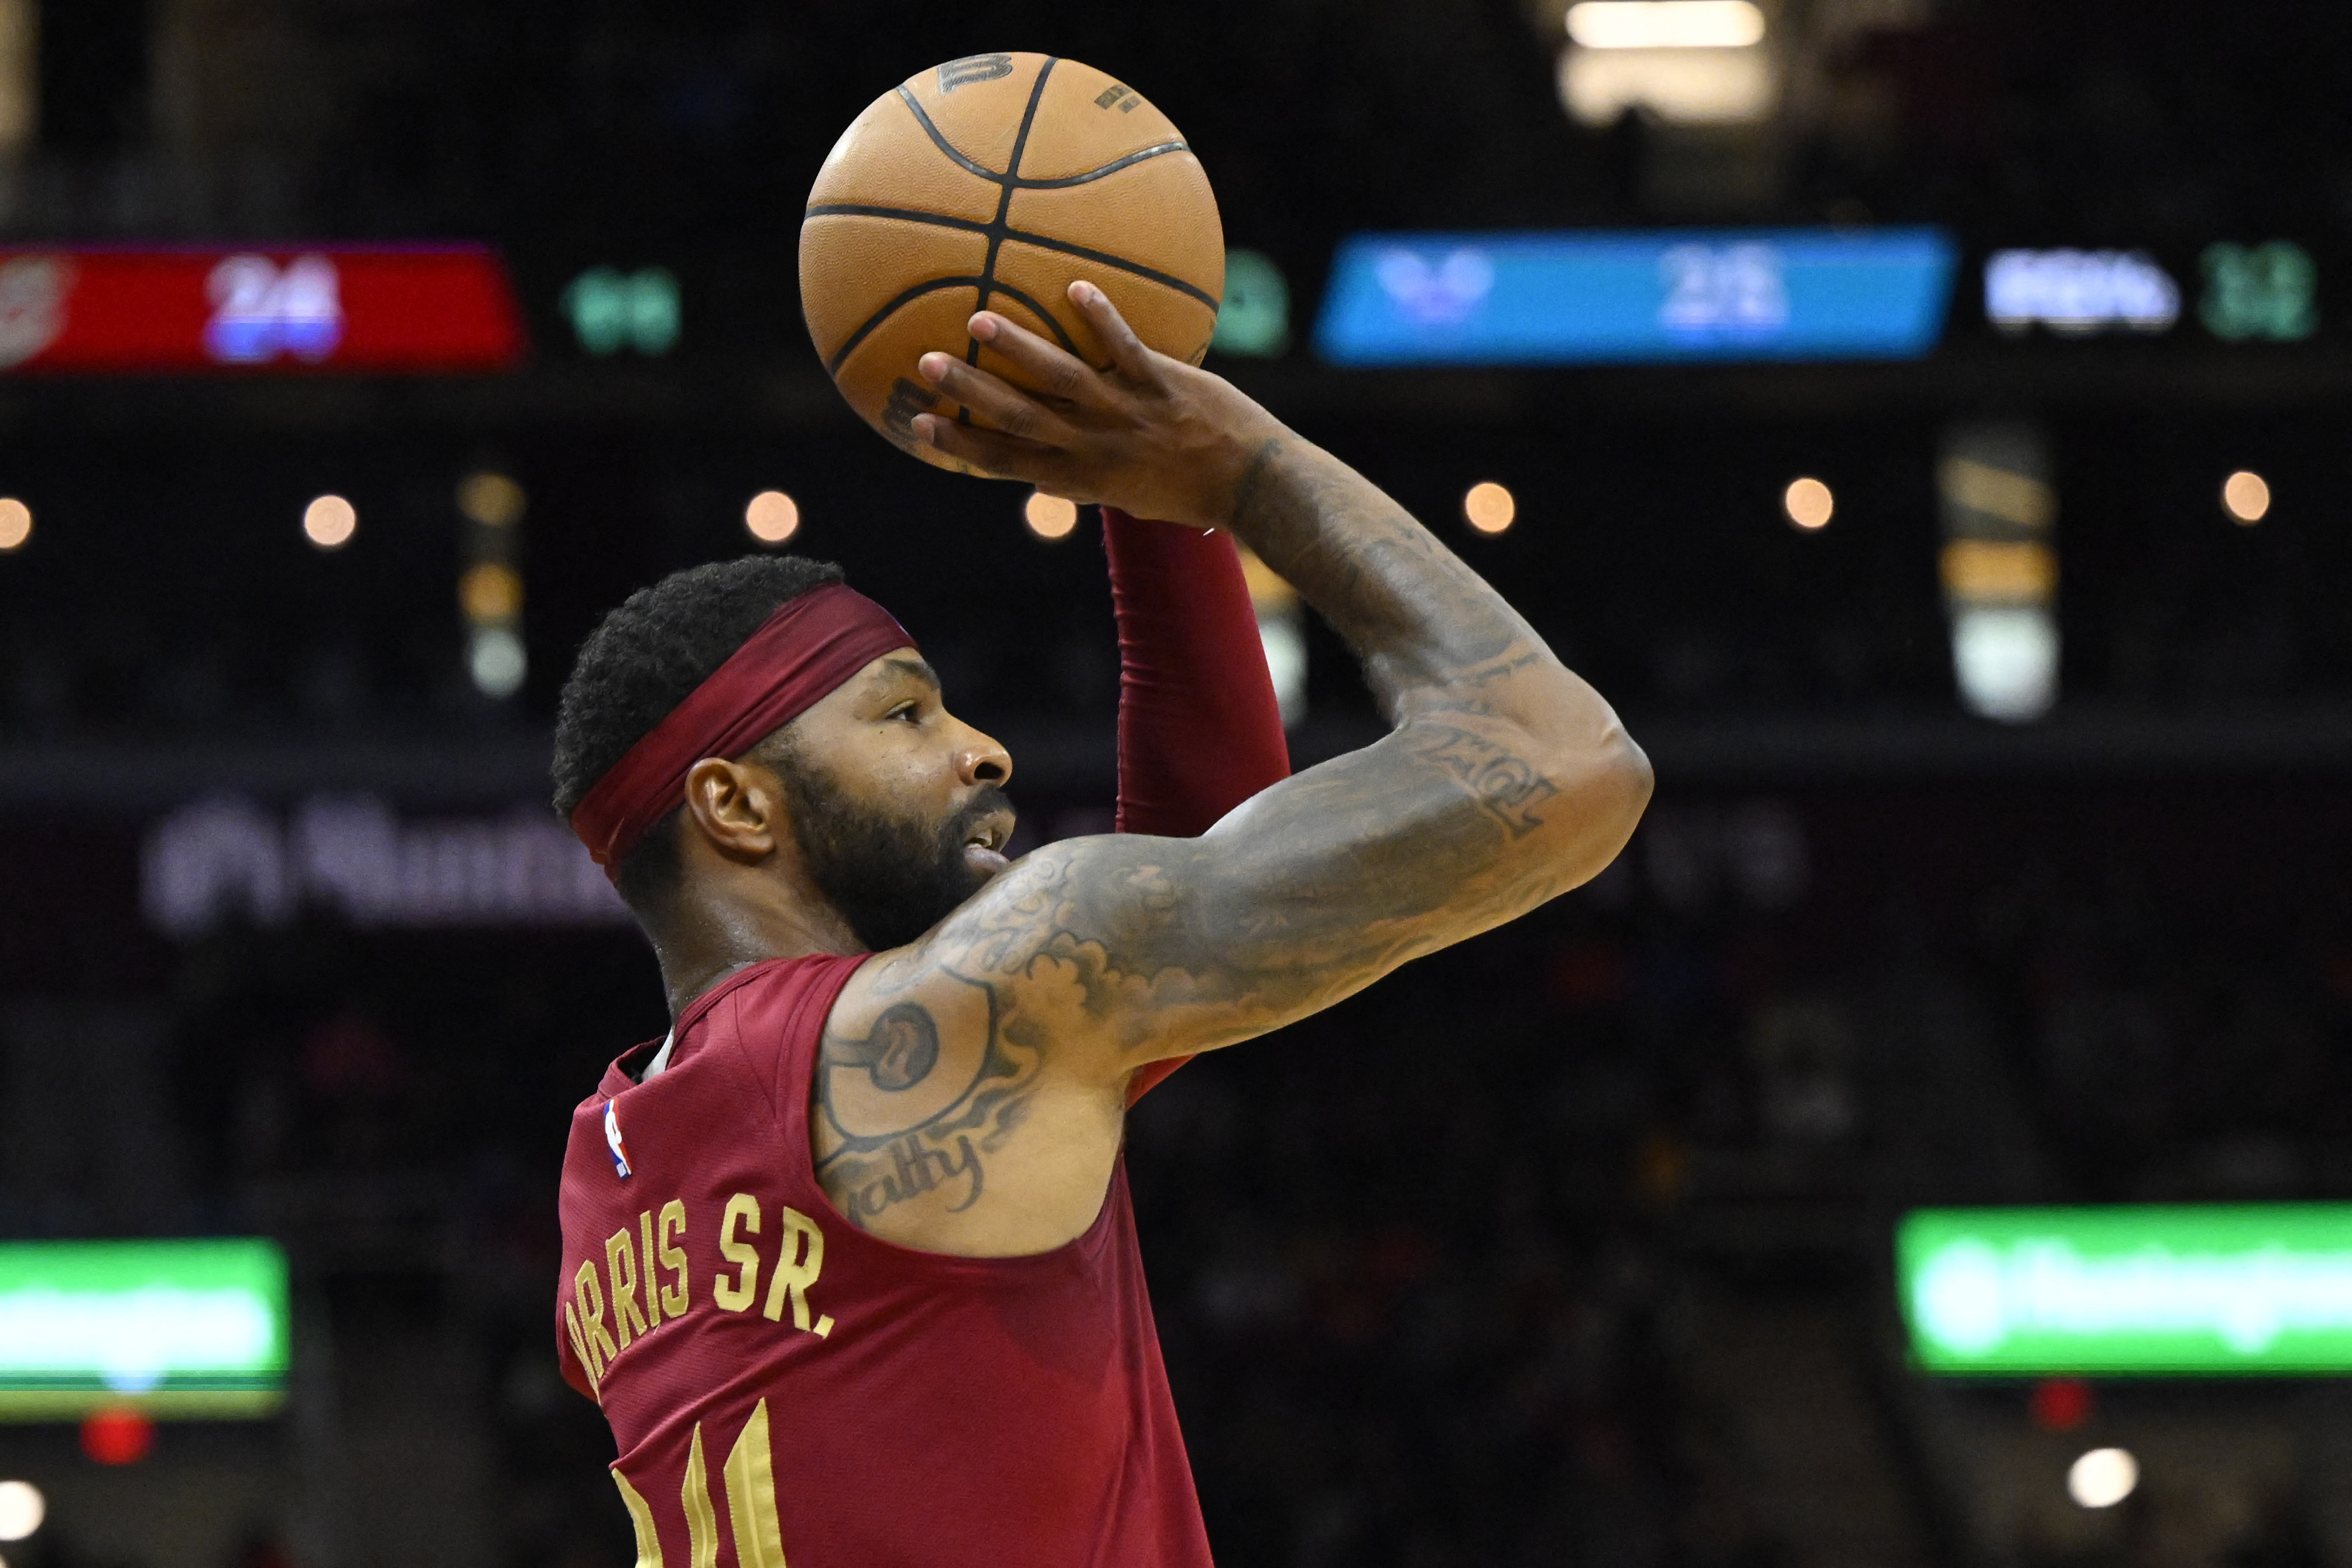 NBA: Charlotte Hornets at Cleveland Cavaliers